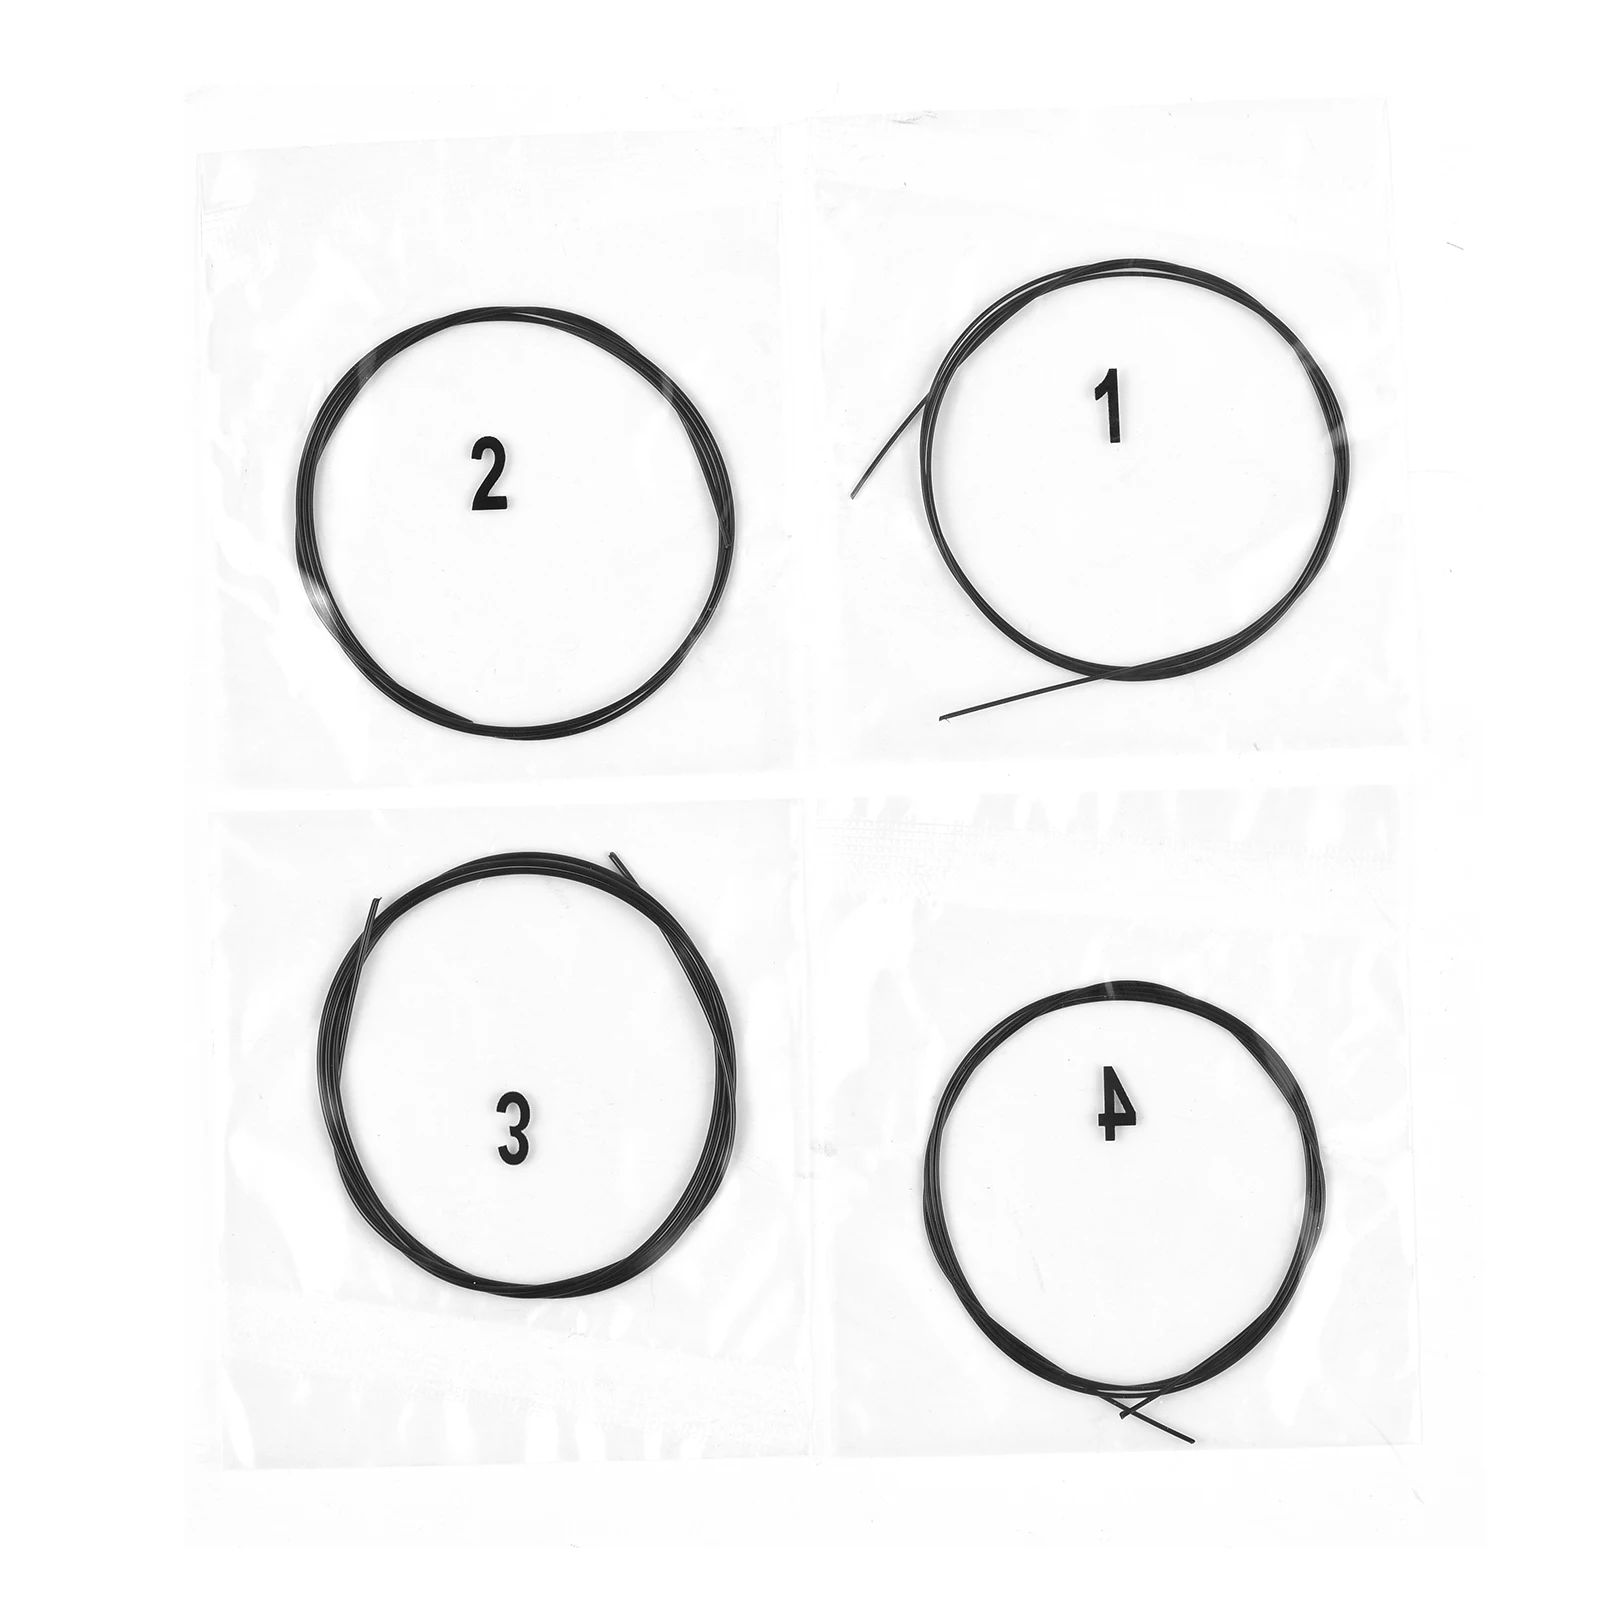 

4 Pcs Ukelele Strings Set Nylon Ukulele Strings Replacement Part Stringed Instrument Accessories For 22 Inch 23 Inch 26 Inch